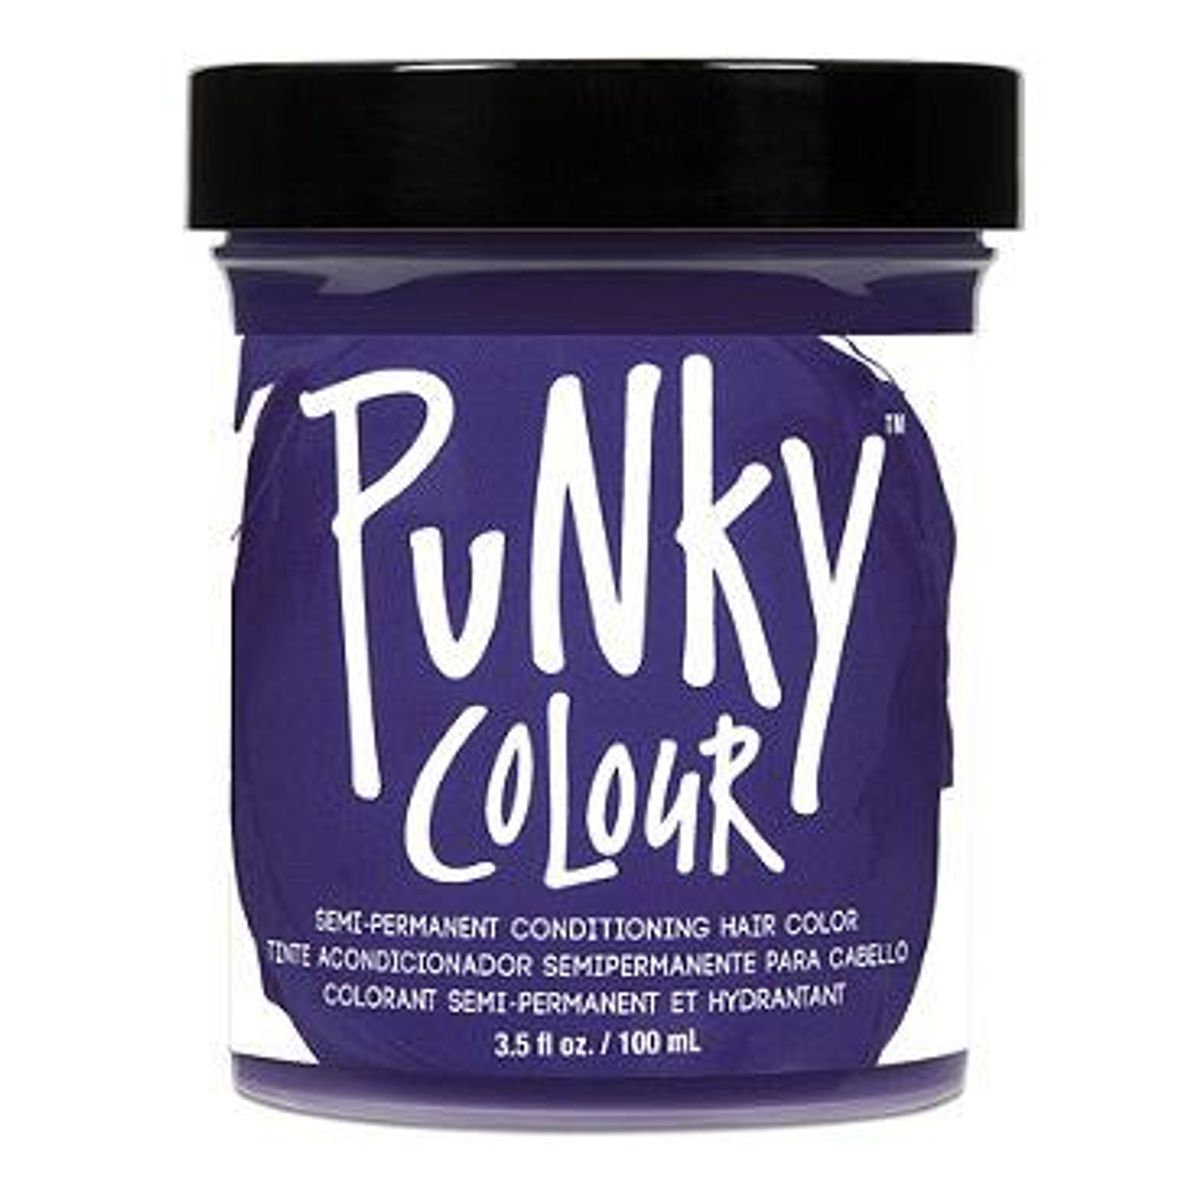 punky colour semi permanent conditioning hair color